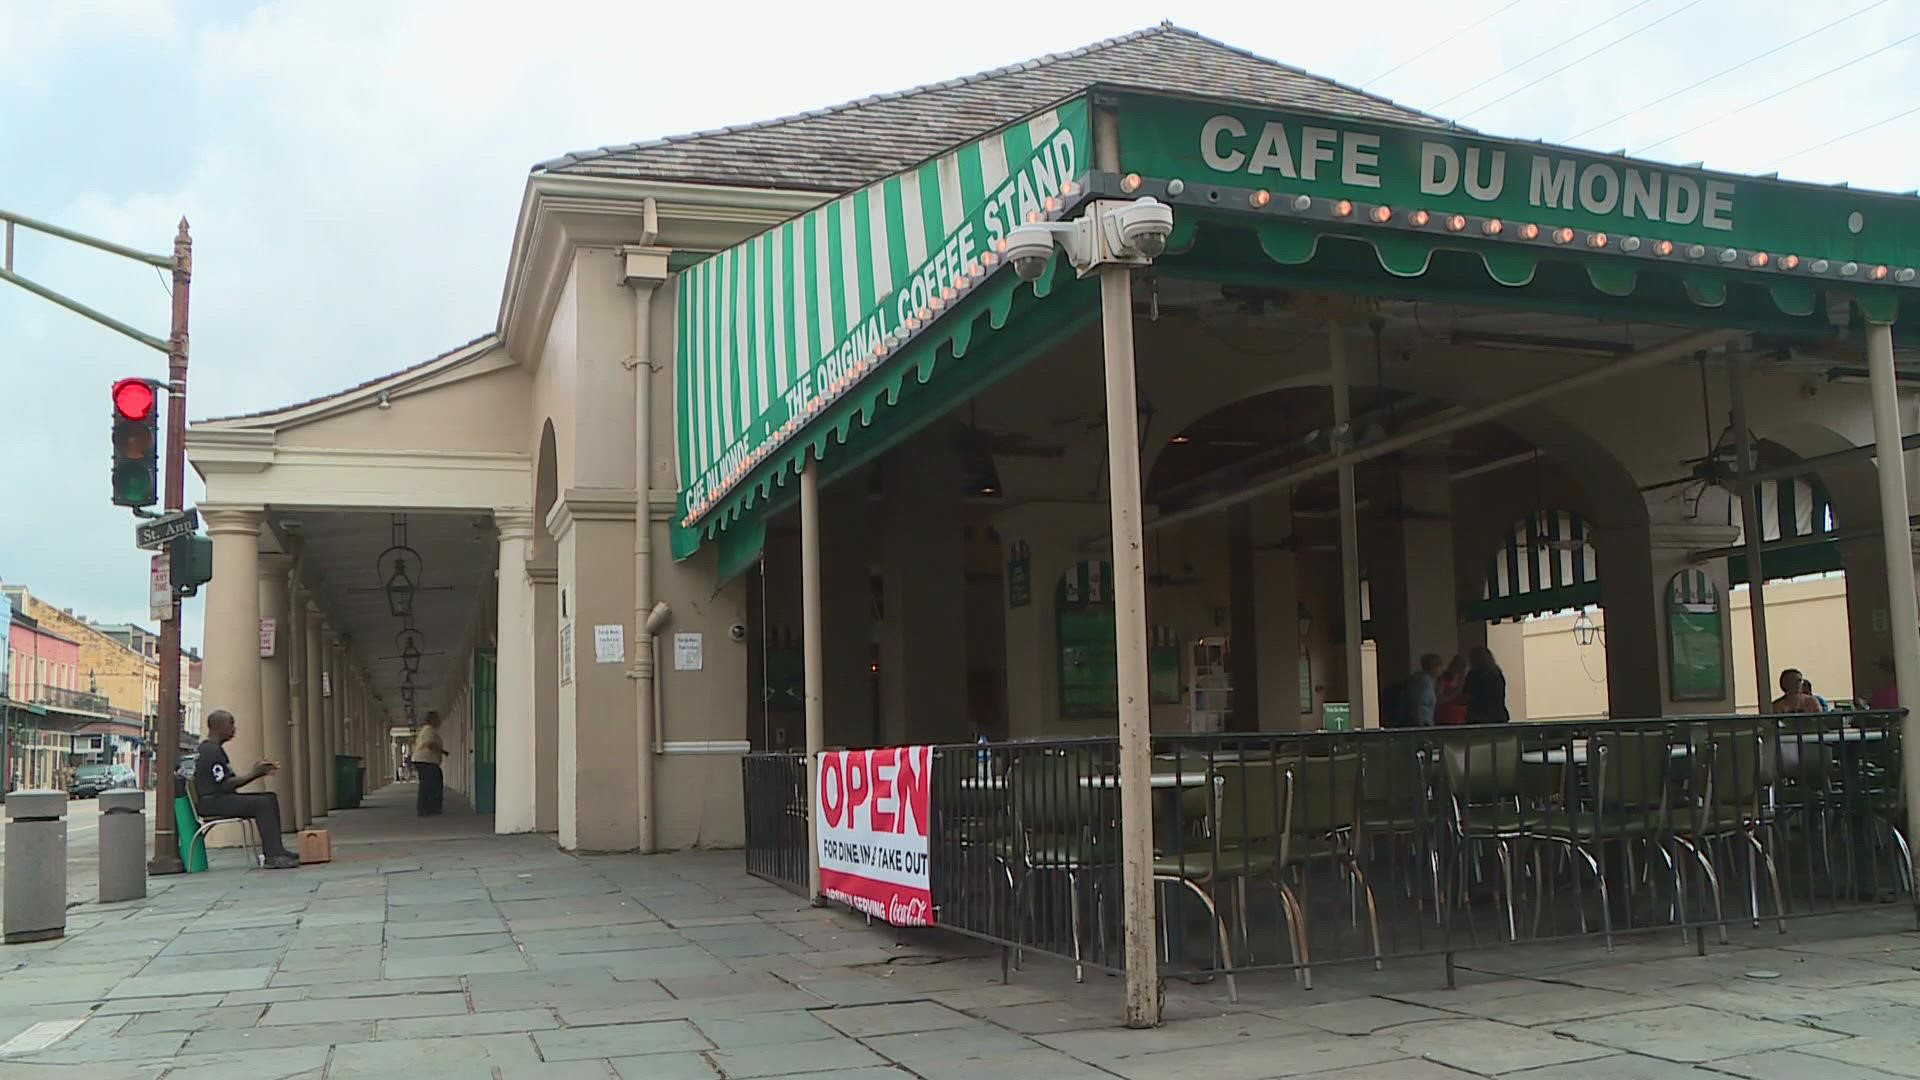 Normally there would be long lines to get beignets at Cafe du Monde, but that isn't the case now as you can walk right up to the window and order.